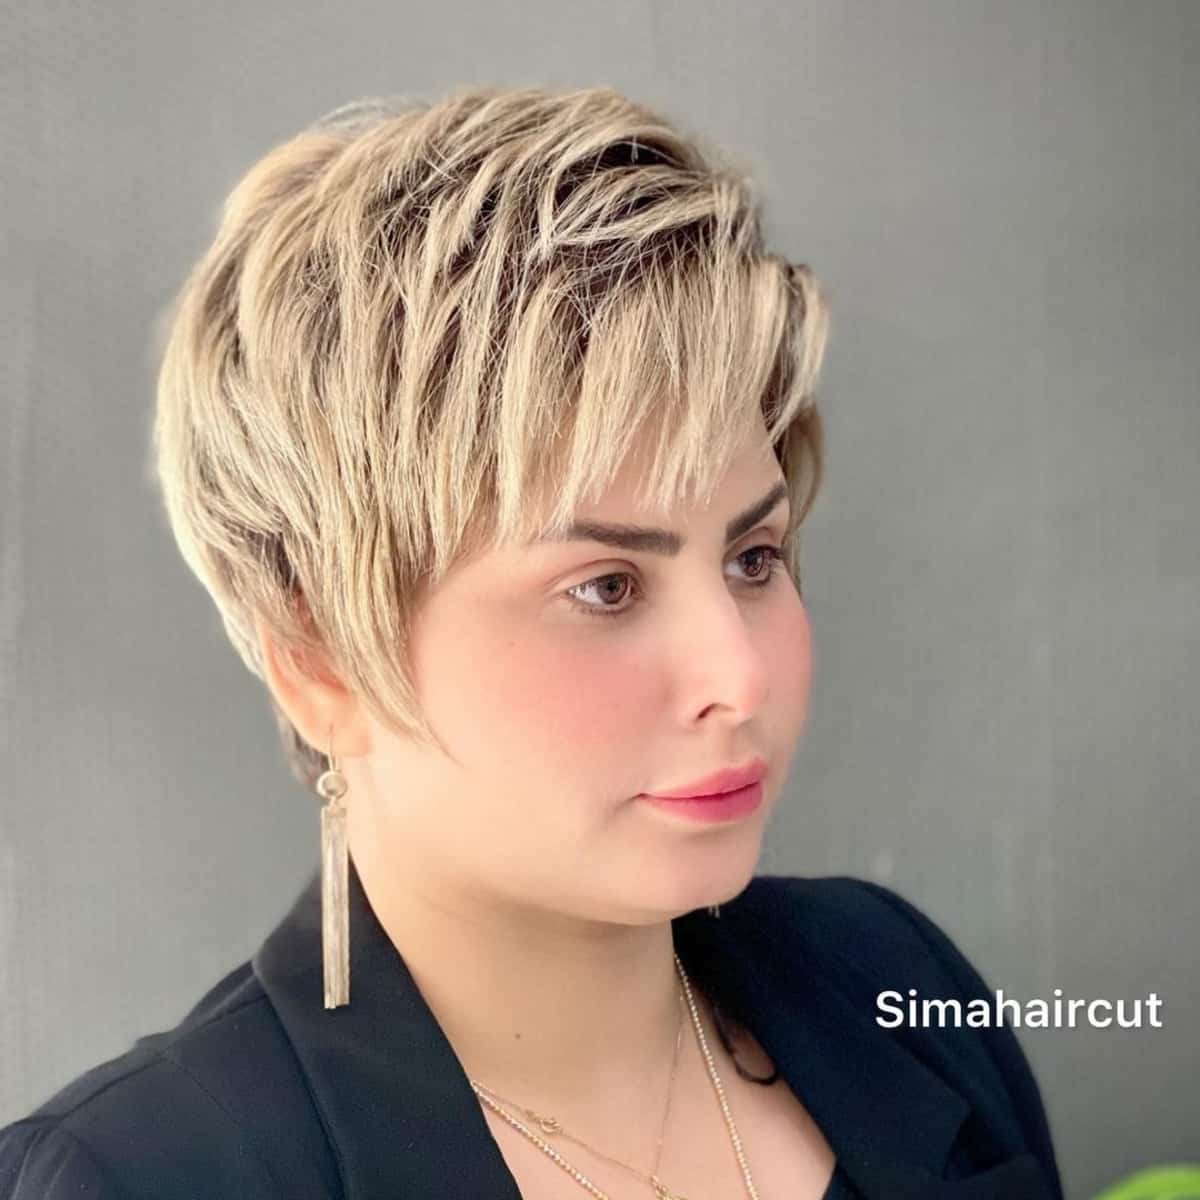 Pixie haircut for women over 30 with round faces